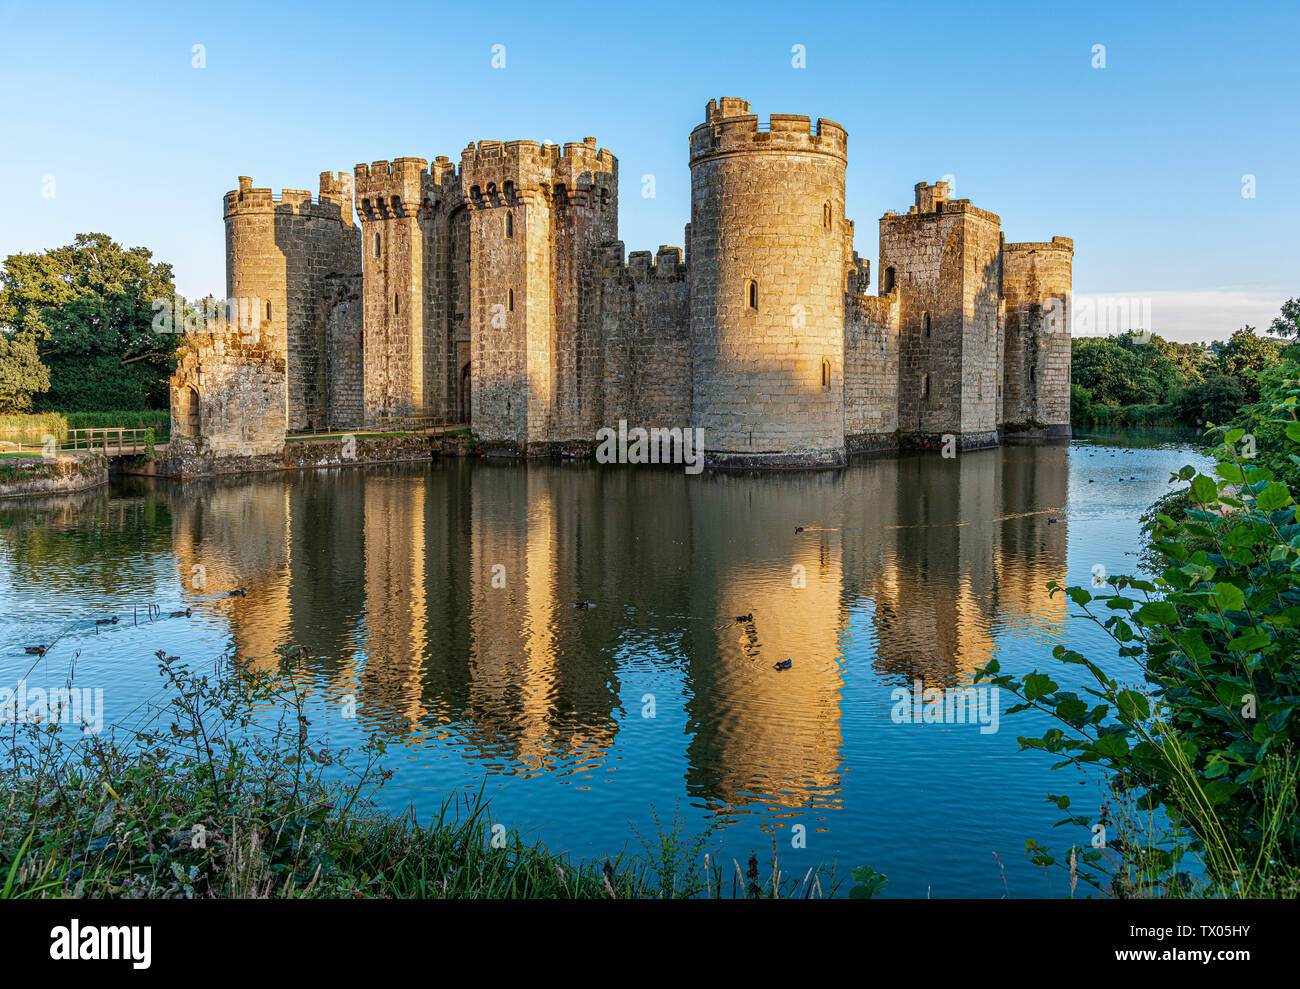 Historic Bodiam Castle and moat in East Sussex, England Stock Photo